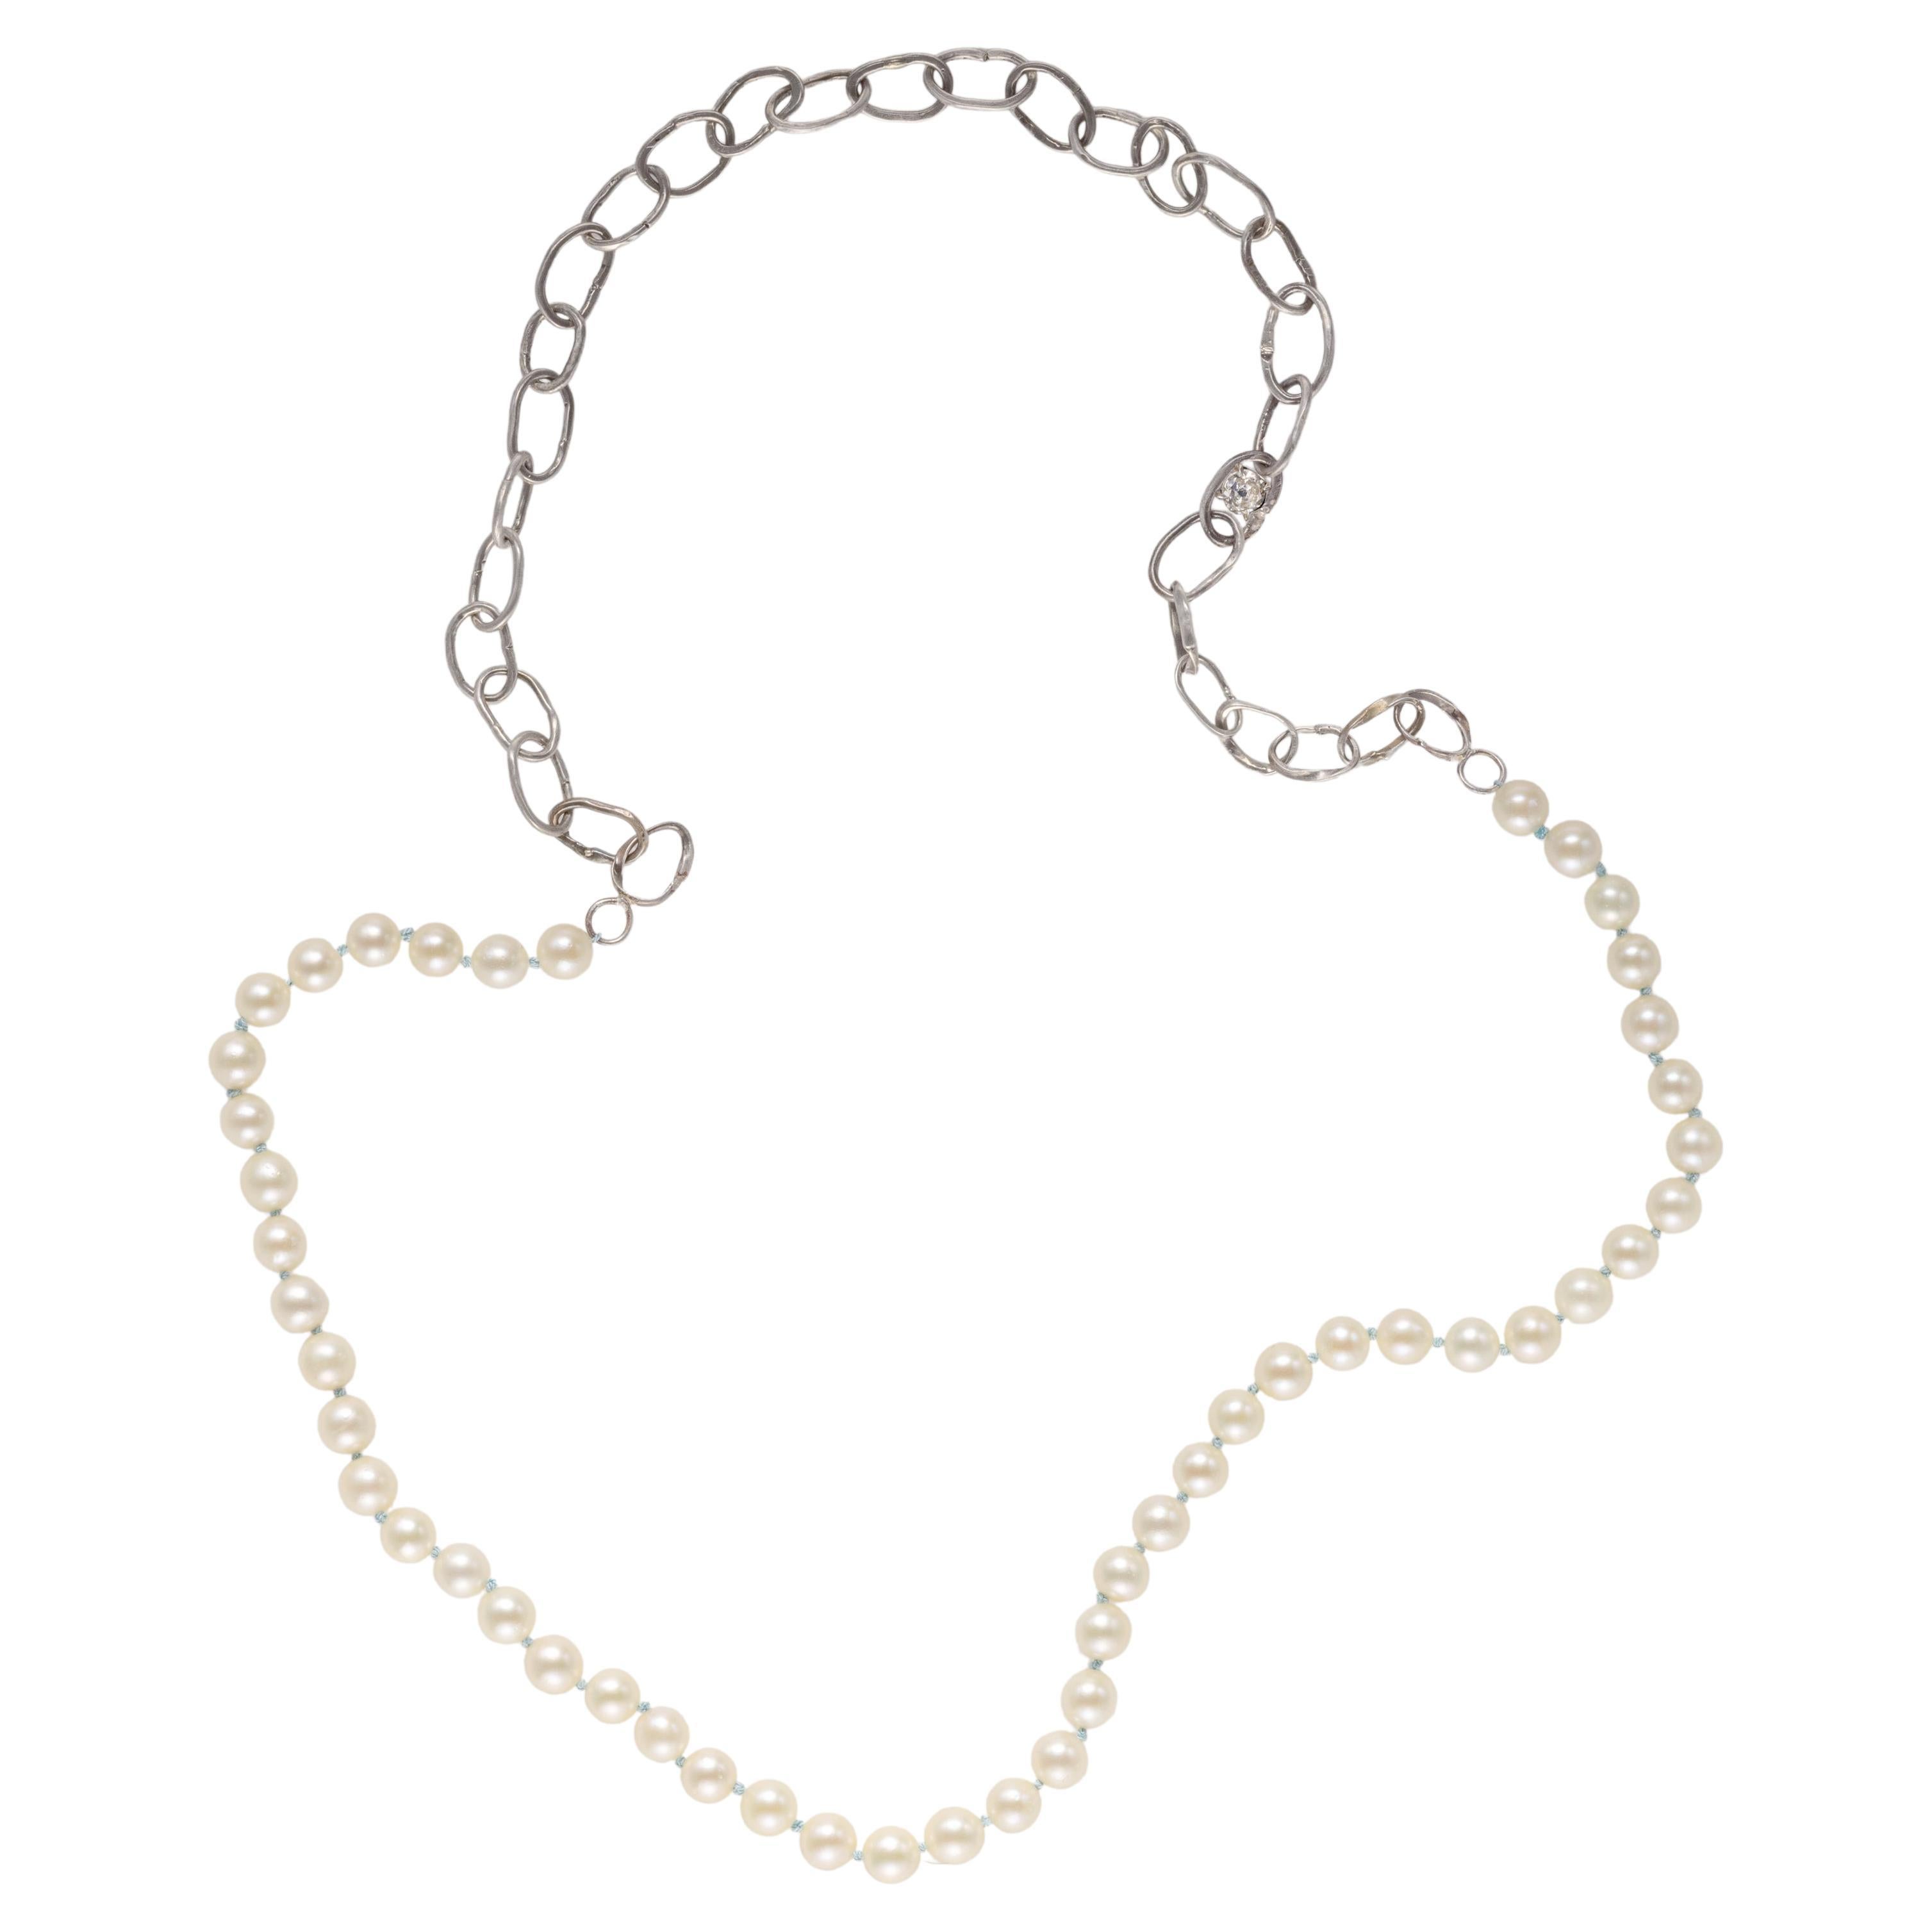 Unisex Akoya Pearl & Chain Necklace with Diamond New